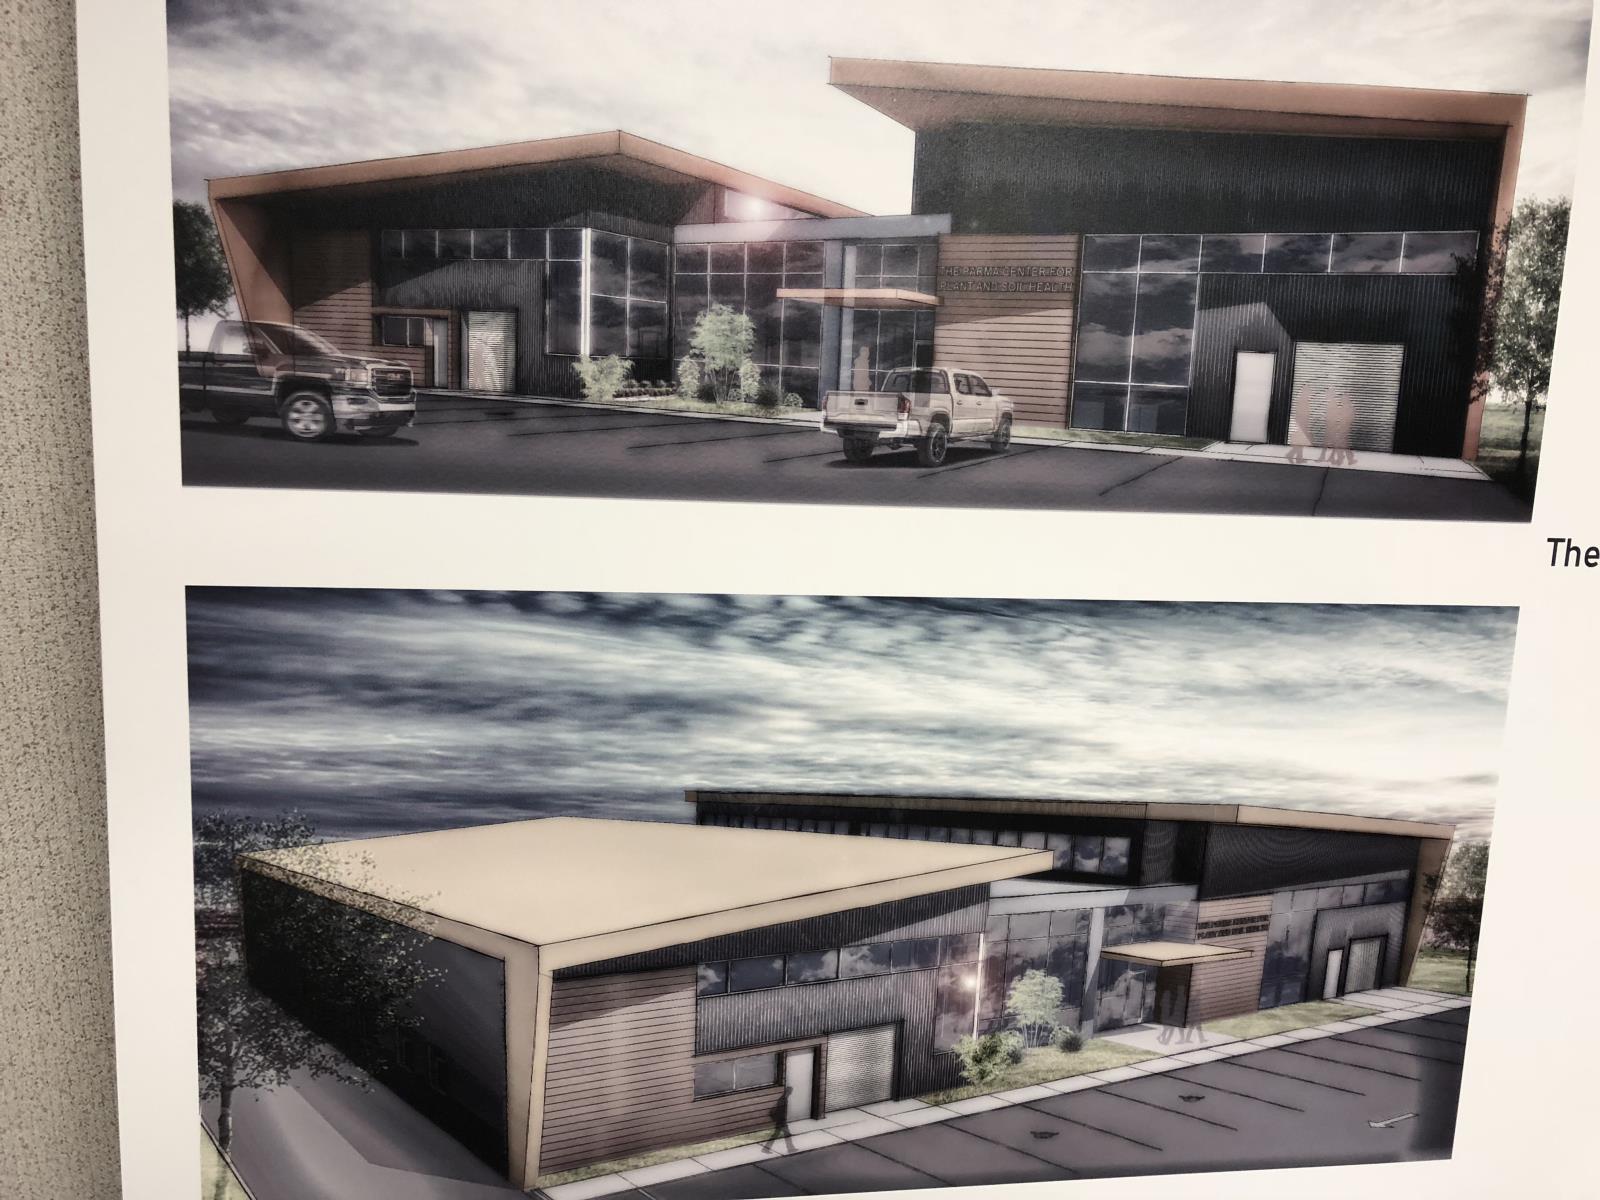 A planned $7 million renovation of University of Idaho’s Parma Agricultural Research and Extension Center, depicted here in an artist’s rendering, is one of several major CALS projects underway or recently completed. 